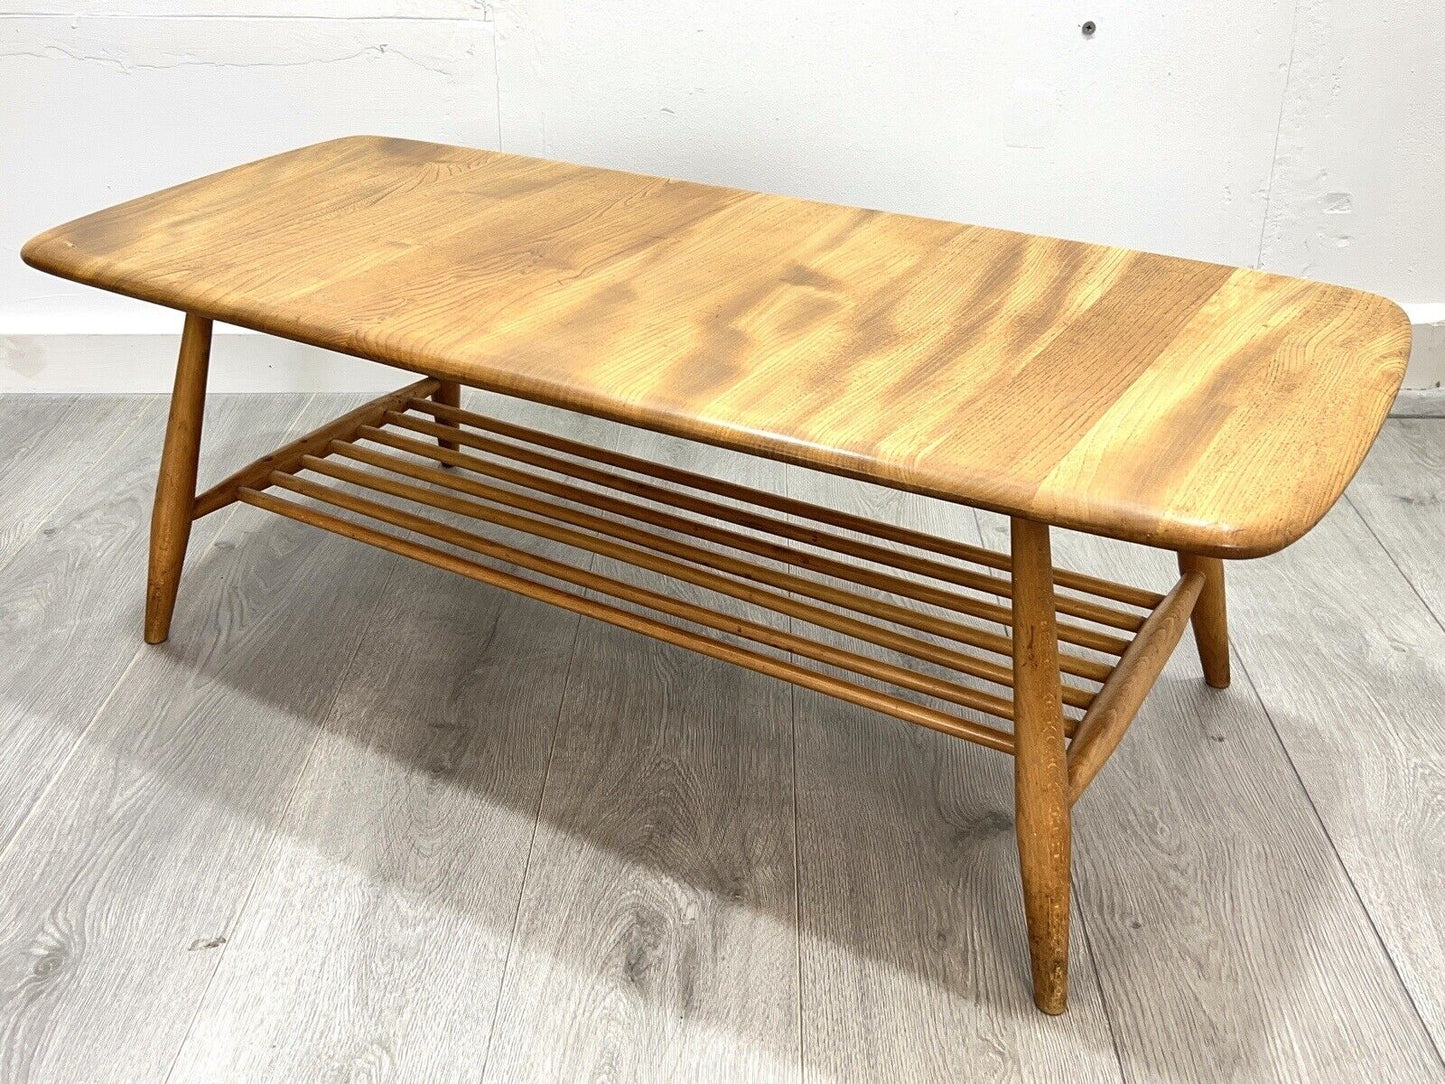 Ercol Model 459, Mid Century Elm Coffee Table with Magazine Rack - Blue Label